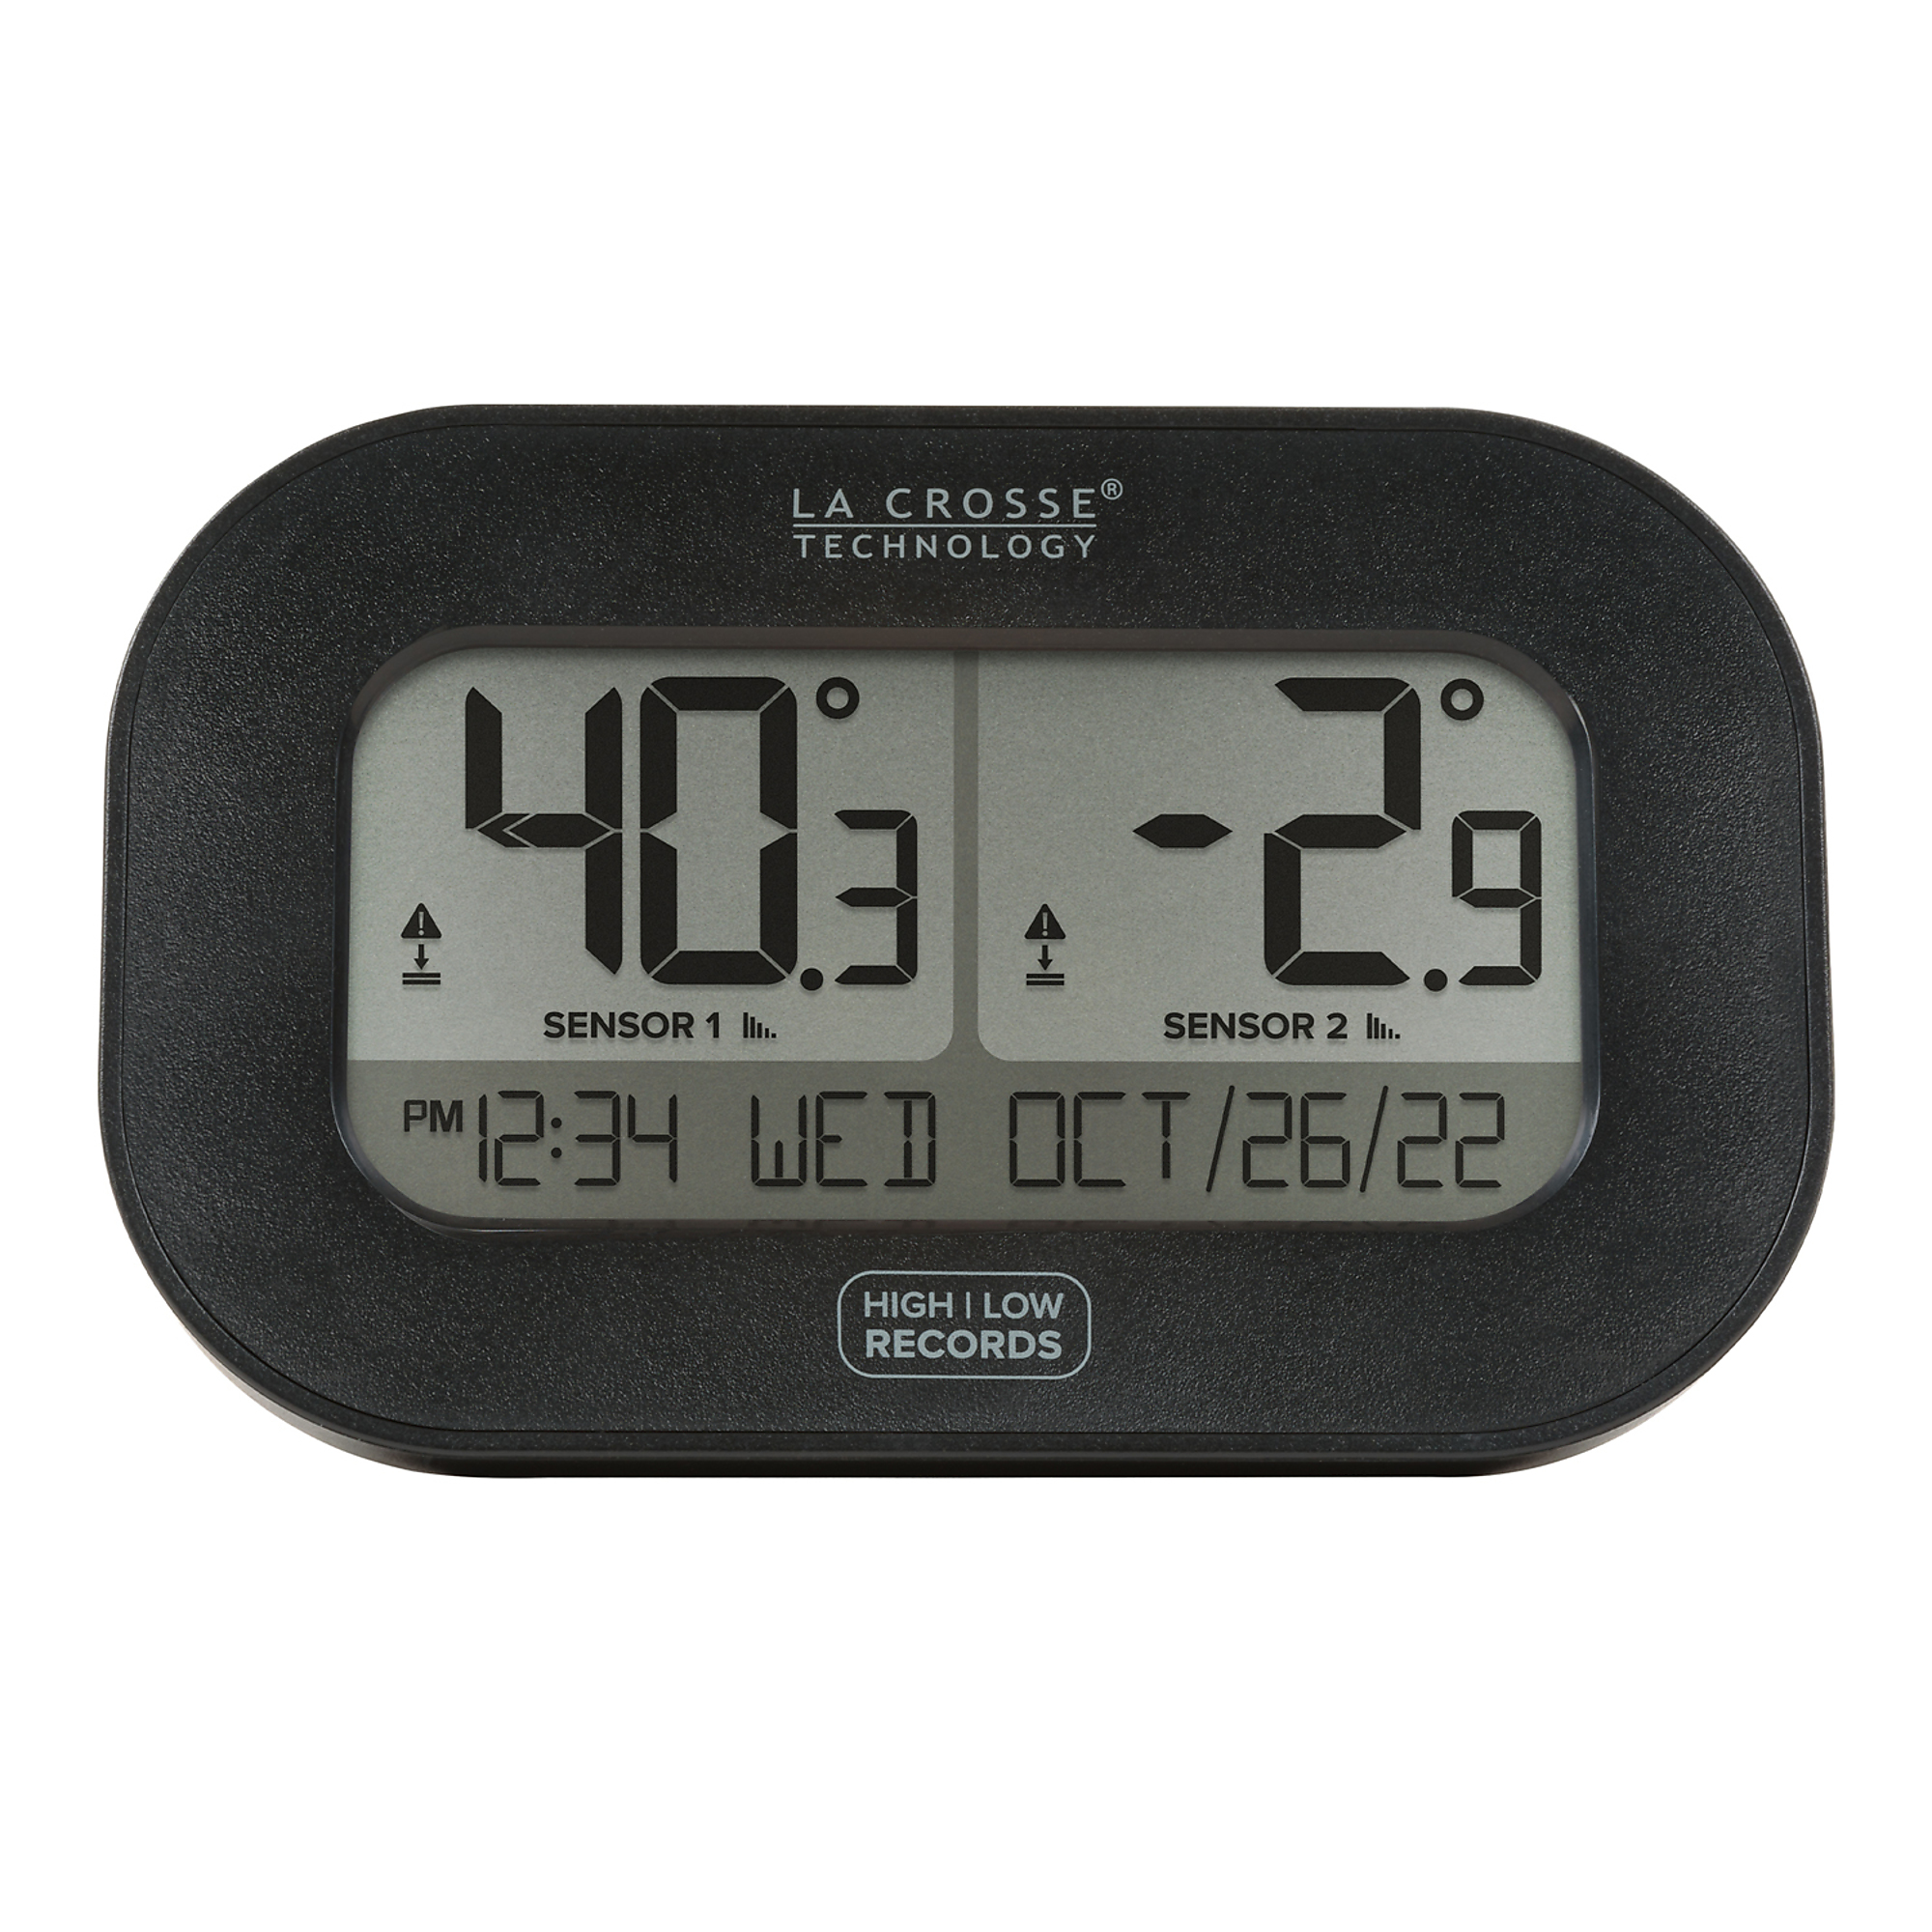 LaCrosse Technology, Dual Temperature Station with Magnetic Back, Display Type LCD, Model 308-04747-INT